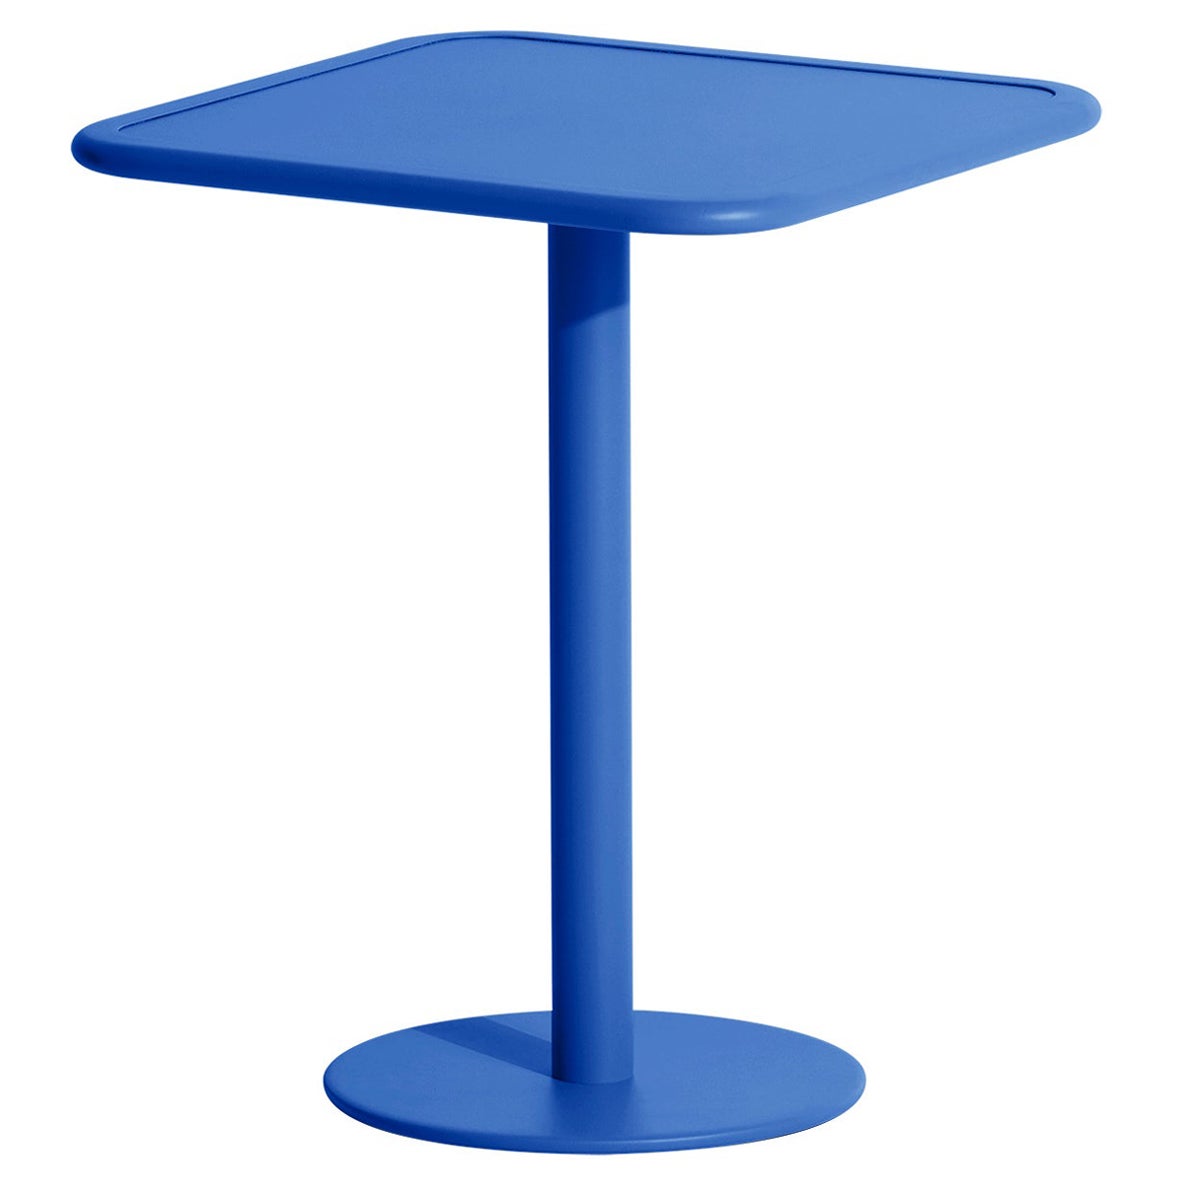 Petite Friture Week-End Bistro Square Dining Table in Blue Aluminium, 2017 For Sale